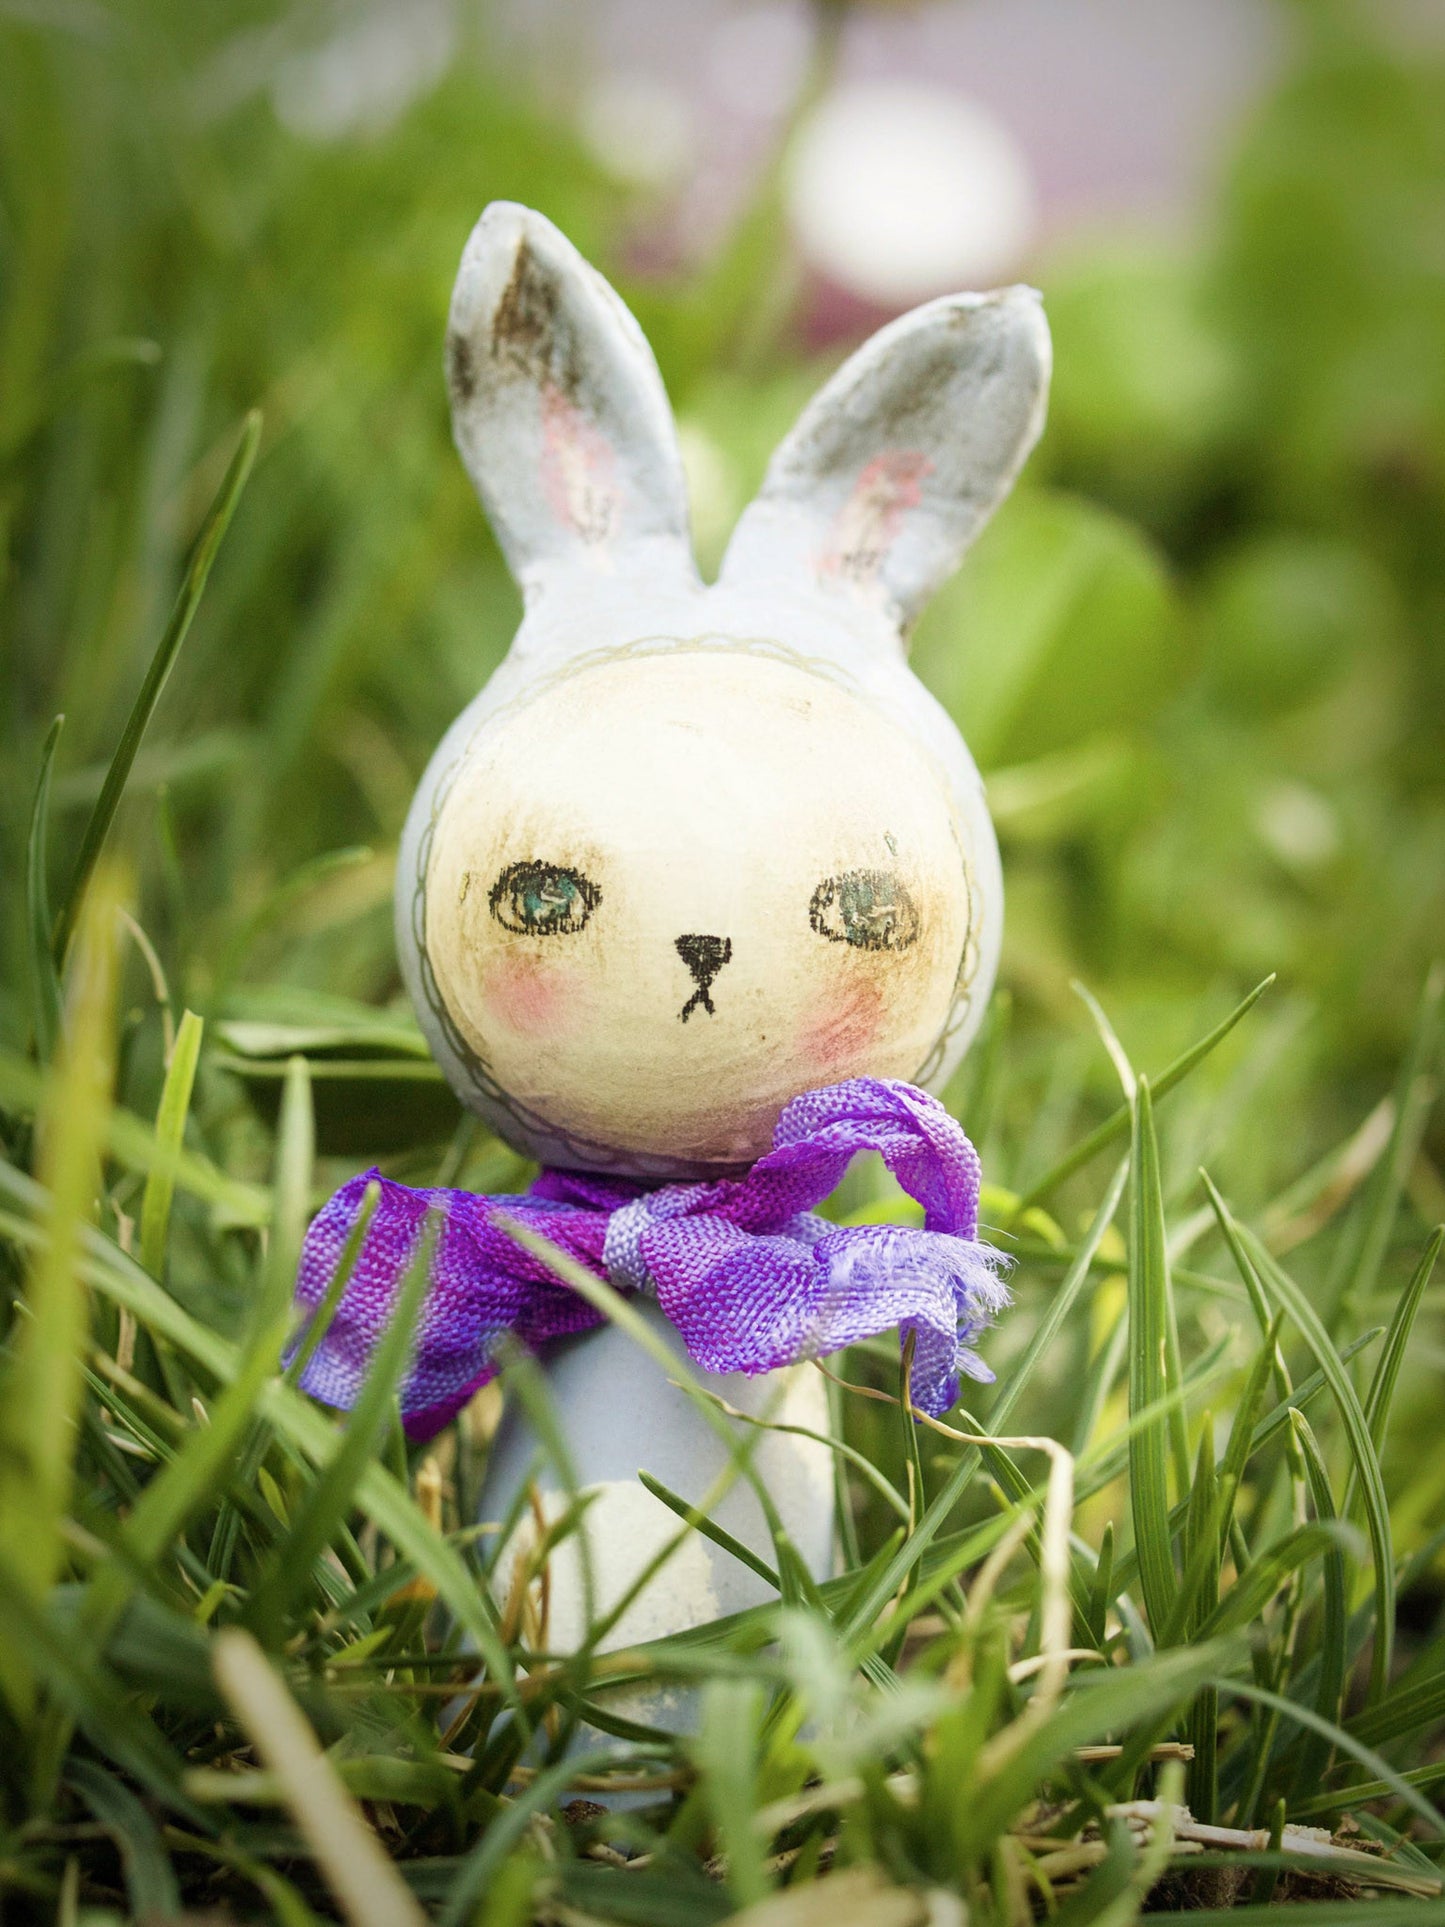 Little and super cute miniature Easter bunnies have hopped along to Danita Art. These adorable wooden kokeshi handmade dolls are really beautiful.